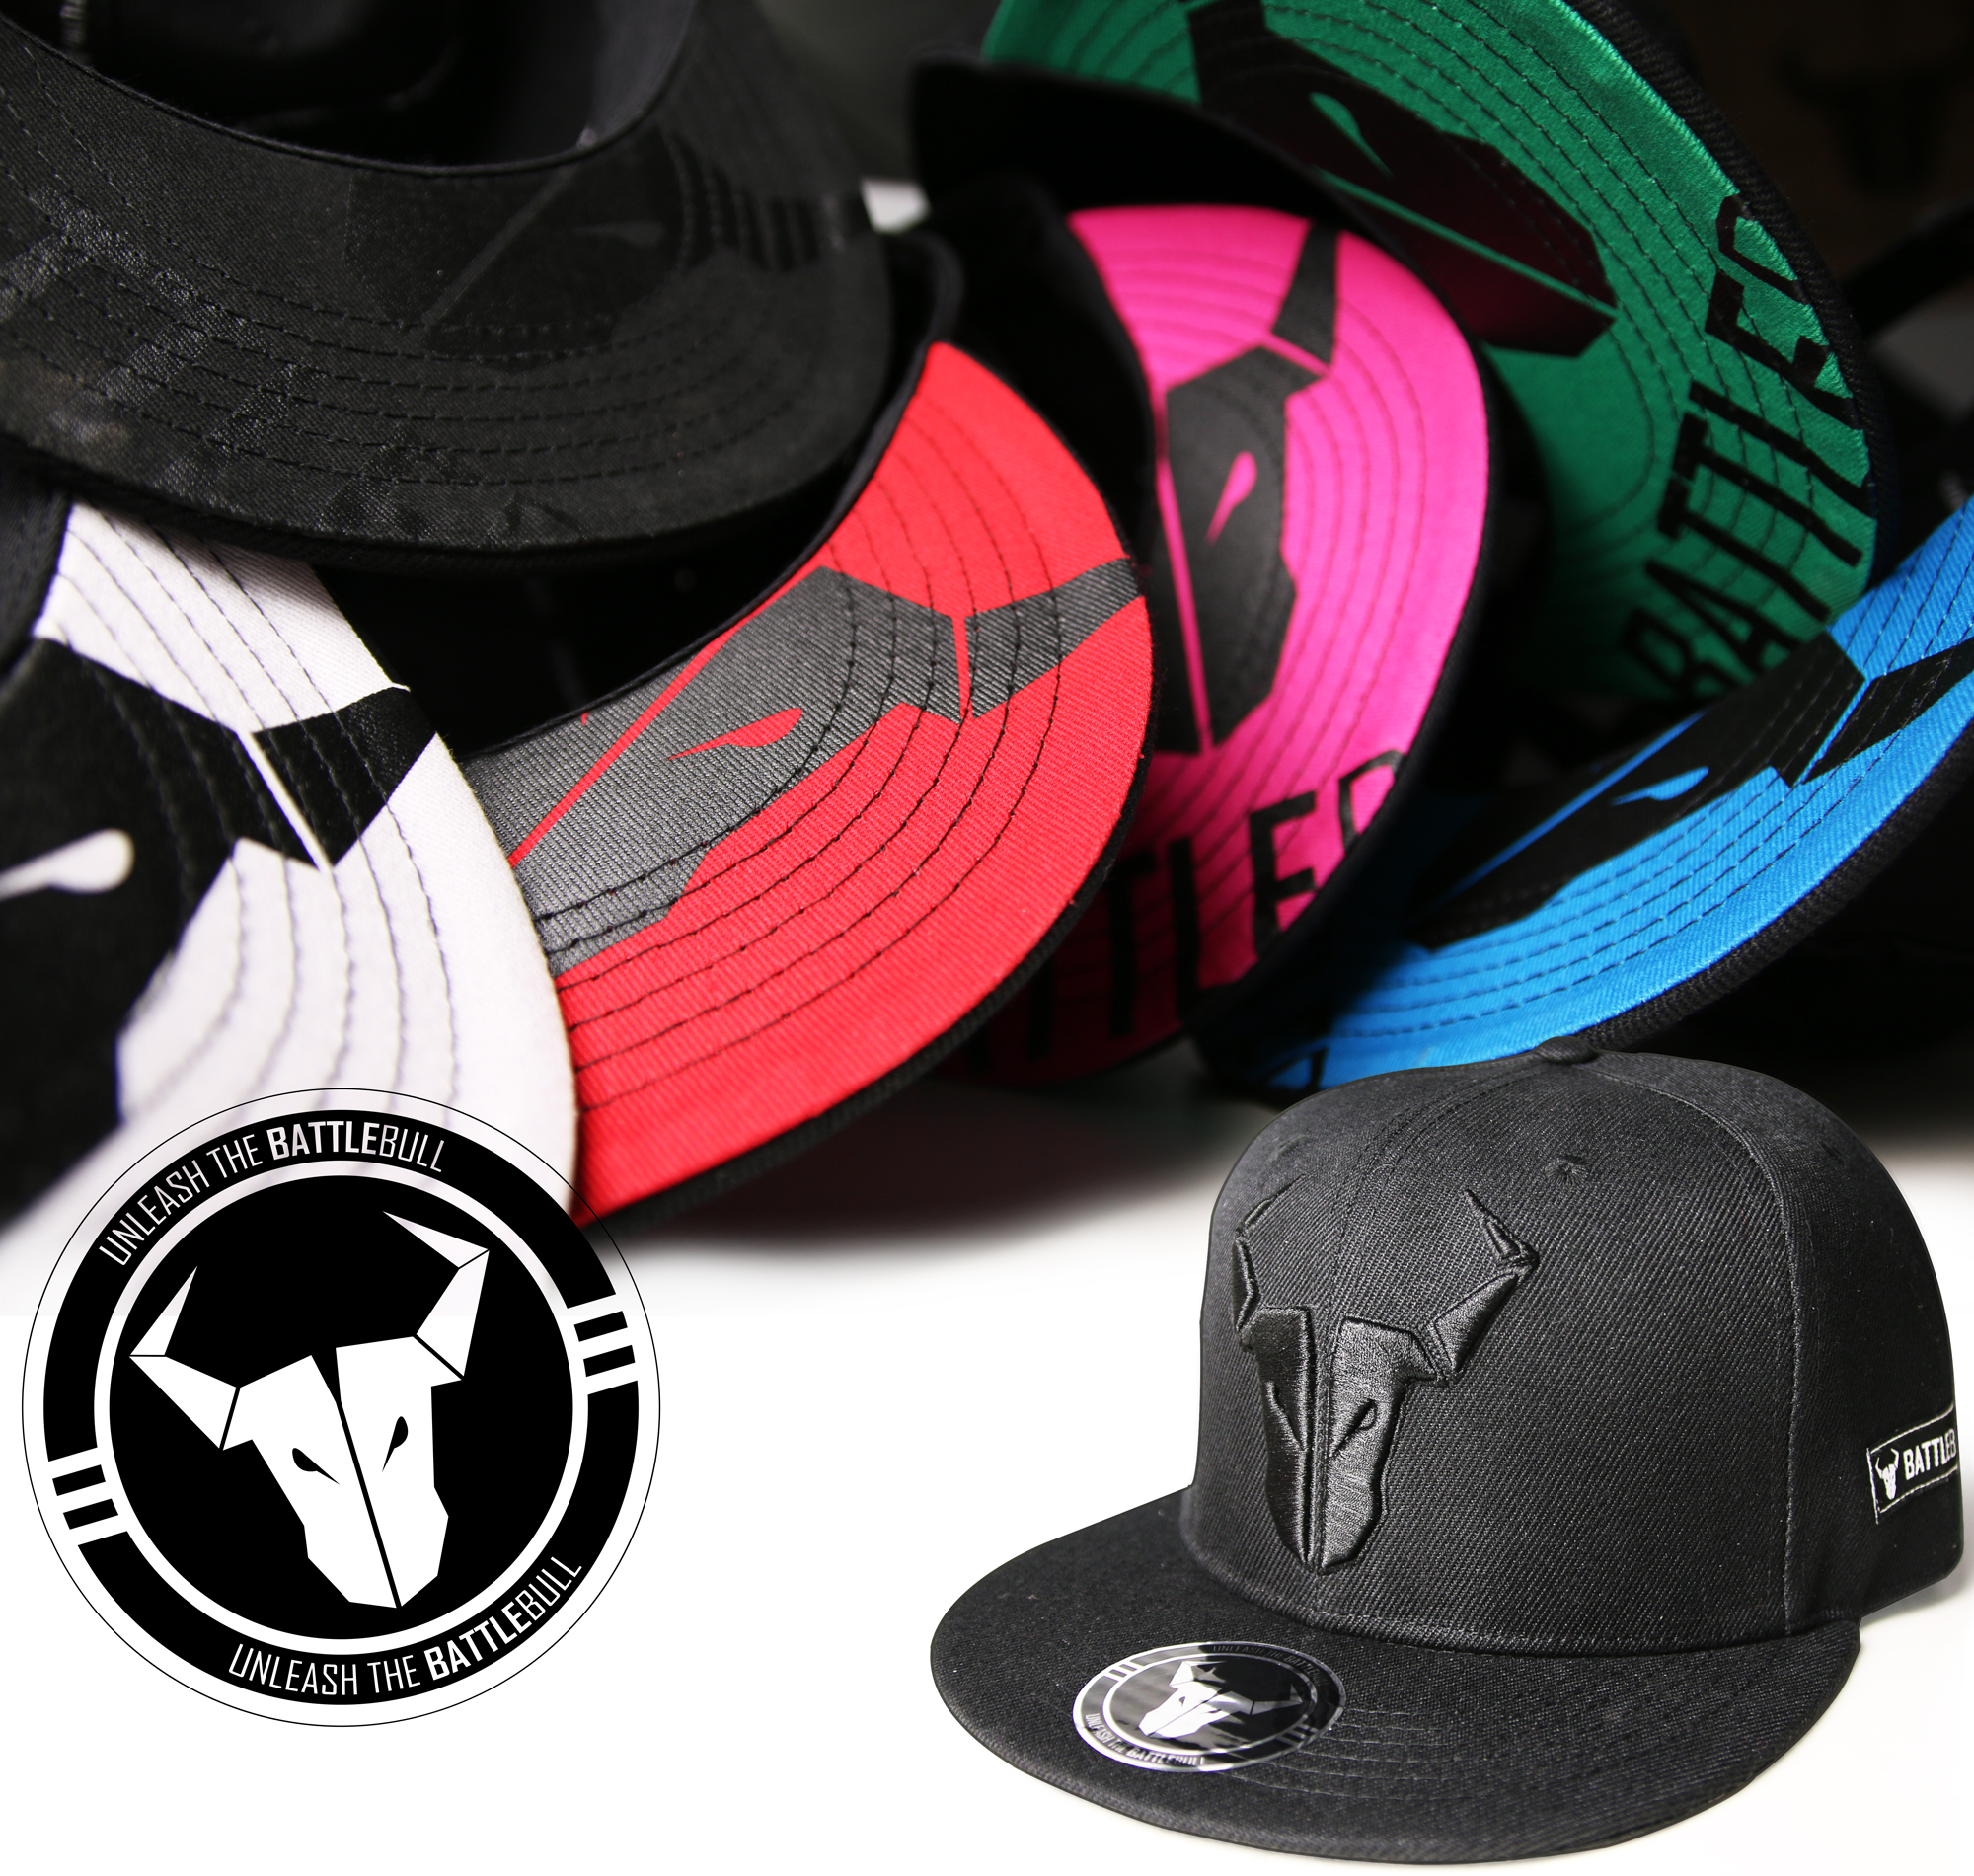 A large marketing image providing additional information about the product BattleBull Squad Snapback Cap Black/Pink - Additional alt info not provided